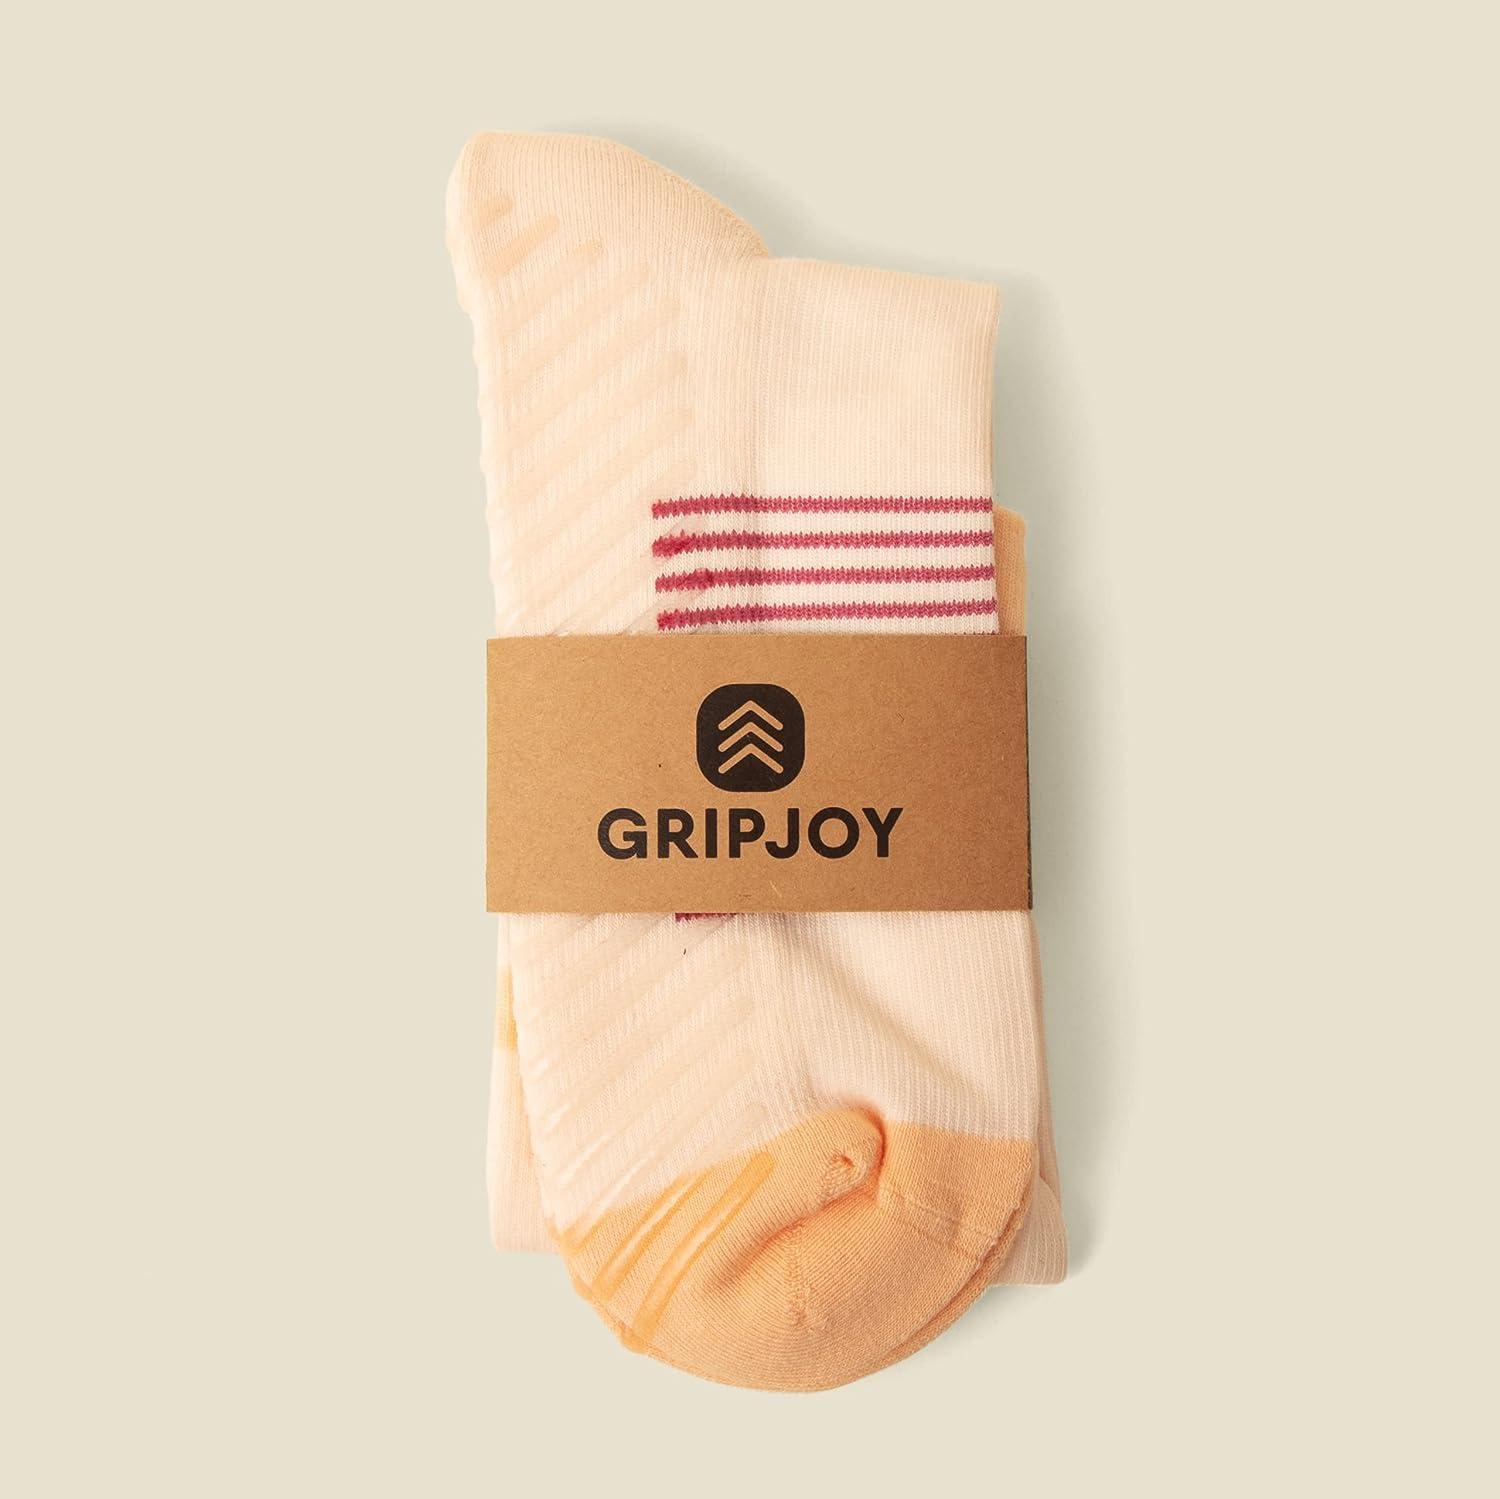 Gripjoy Non Slip Socks for Women and Men (3 pairs) - Low Cut Grip